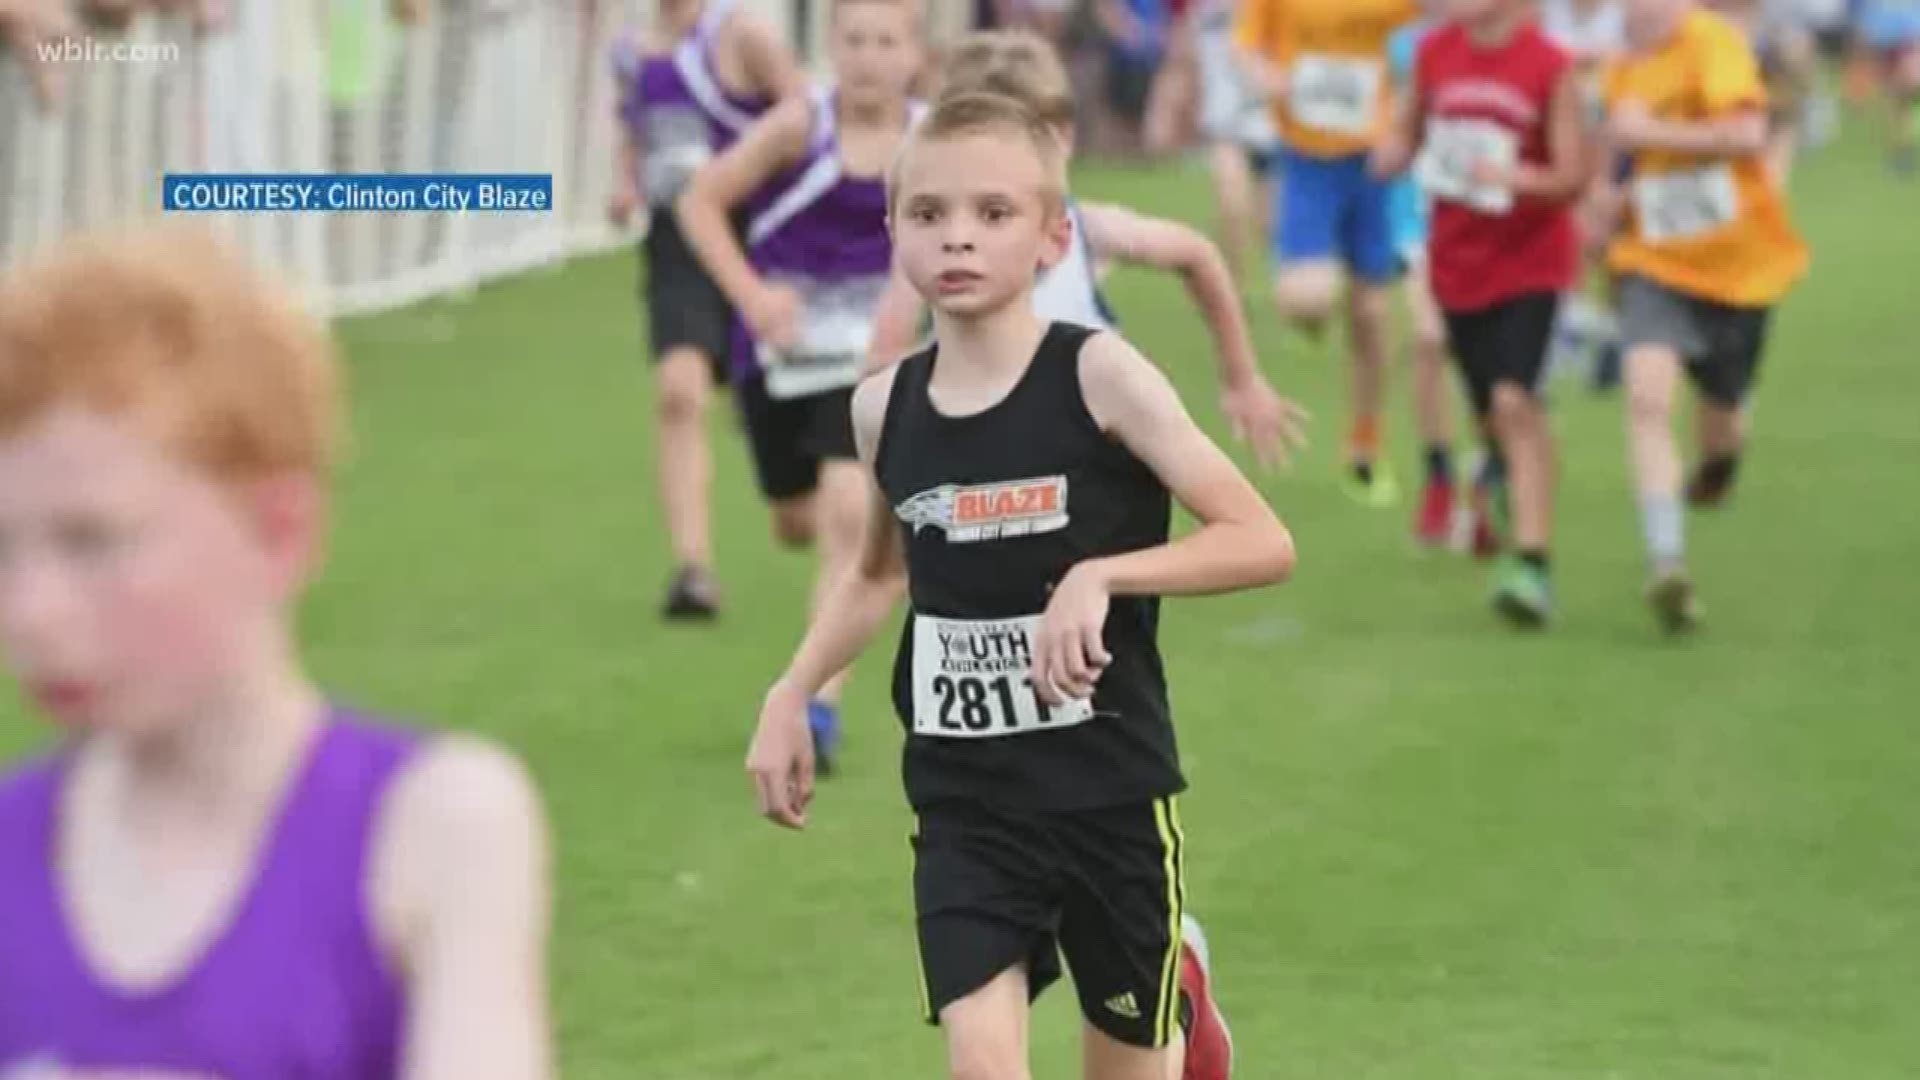 In its second school year, the Clinton City Blaze has added a number of different sports like swimming, cross country, and bowling.